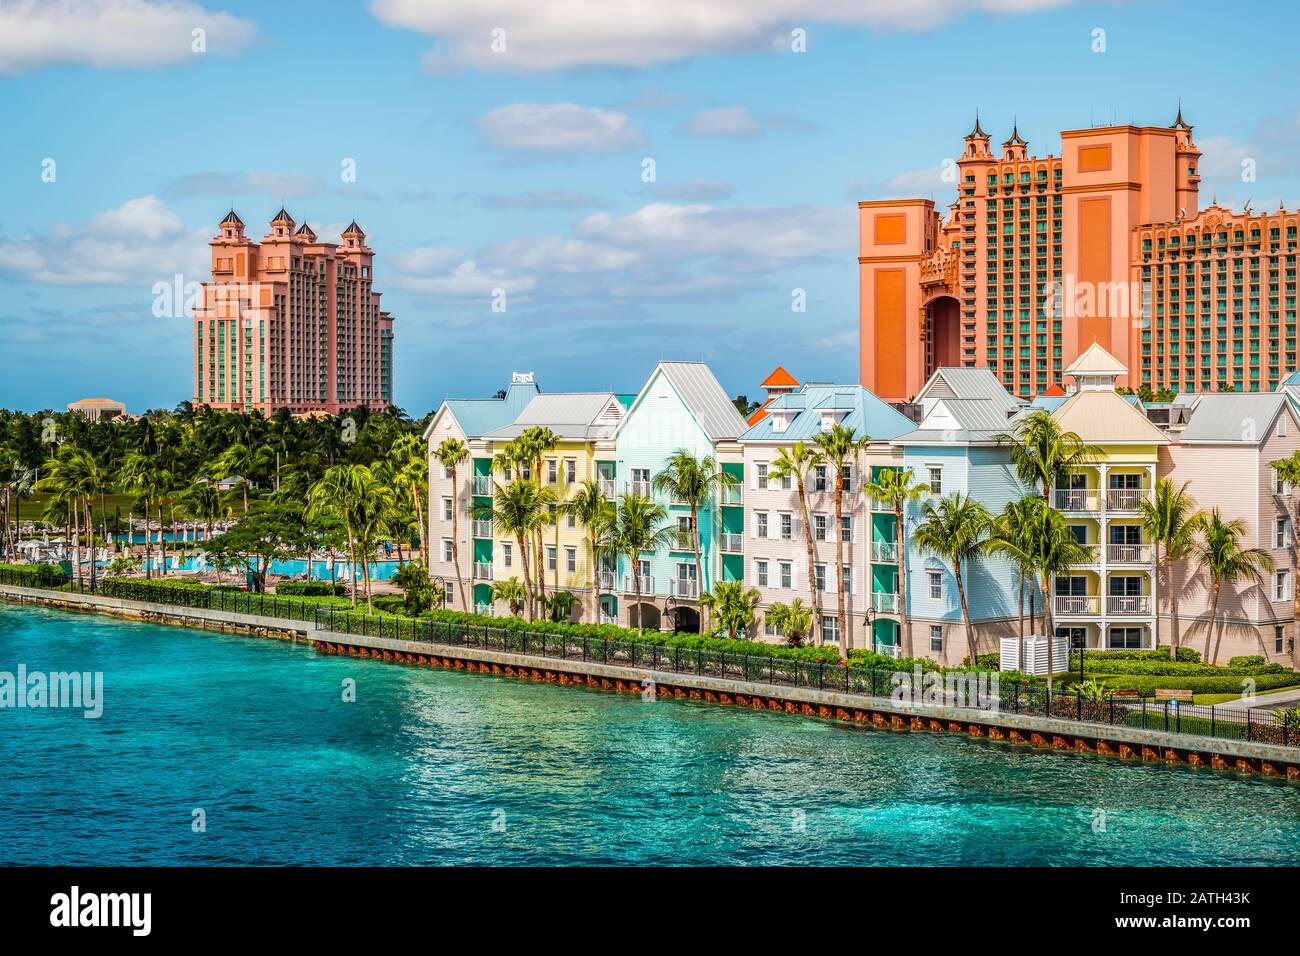 Colorful houses along the waterfront at the ferry terminal of Paradise Island, Nassau, Bahamas. Stock Photo